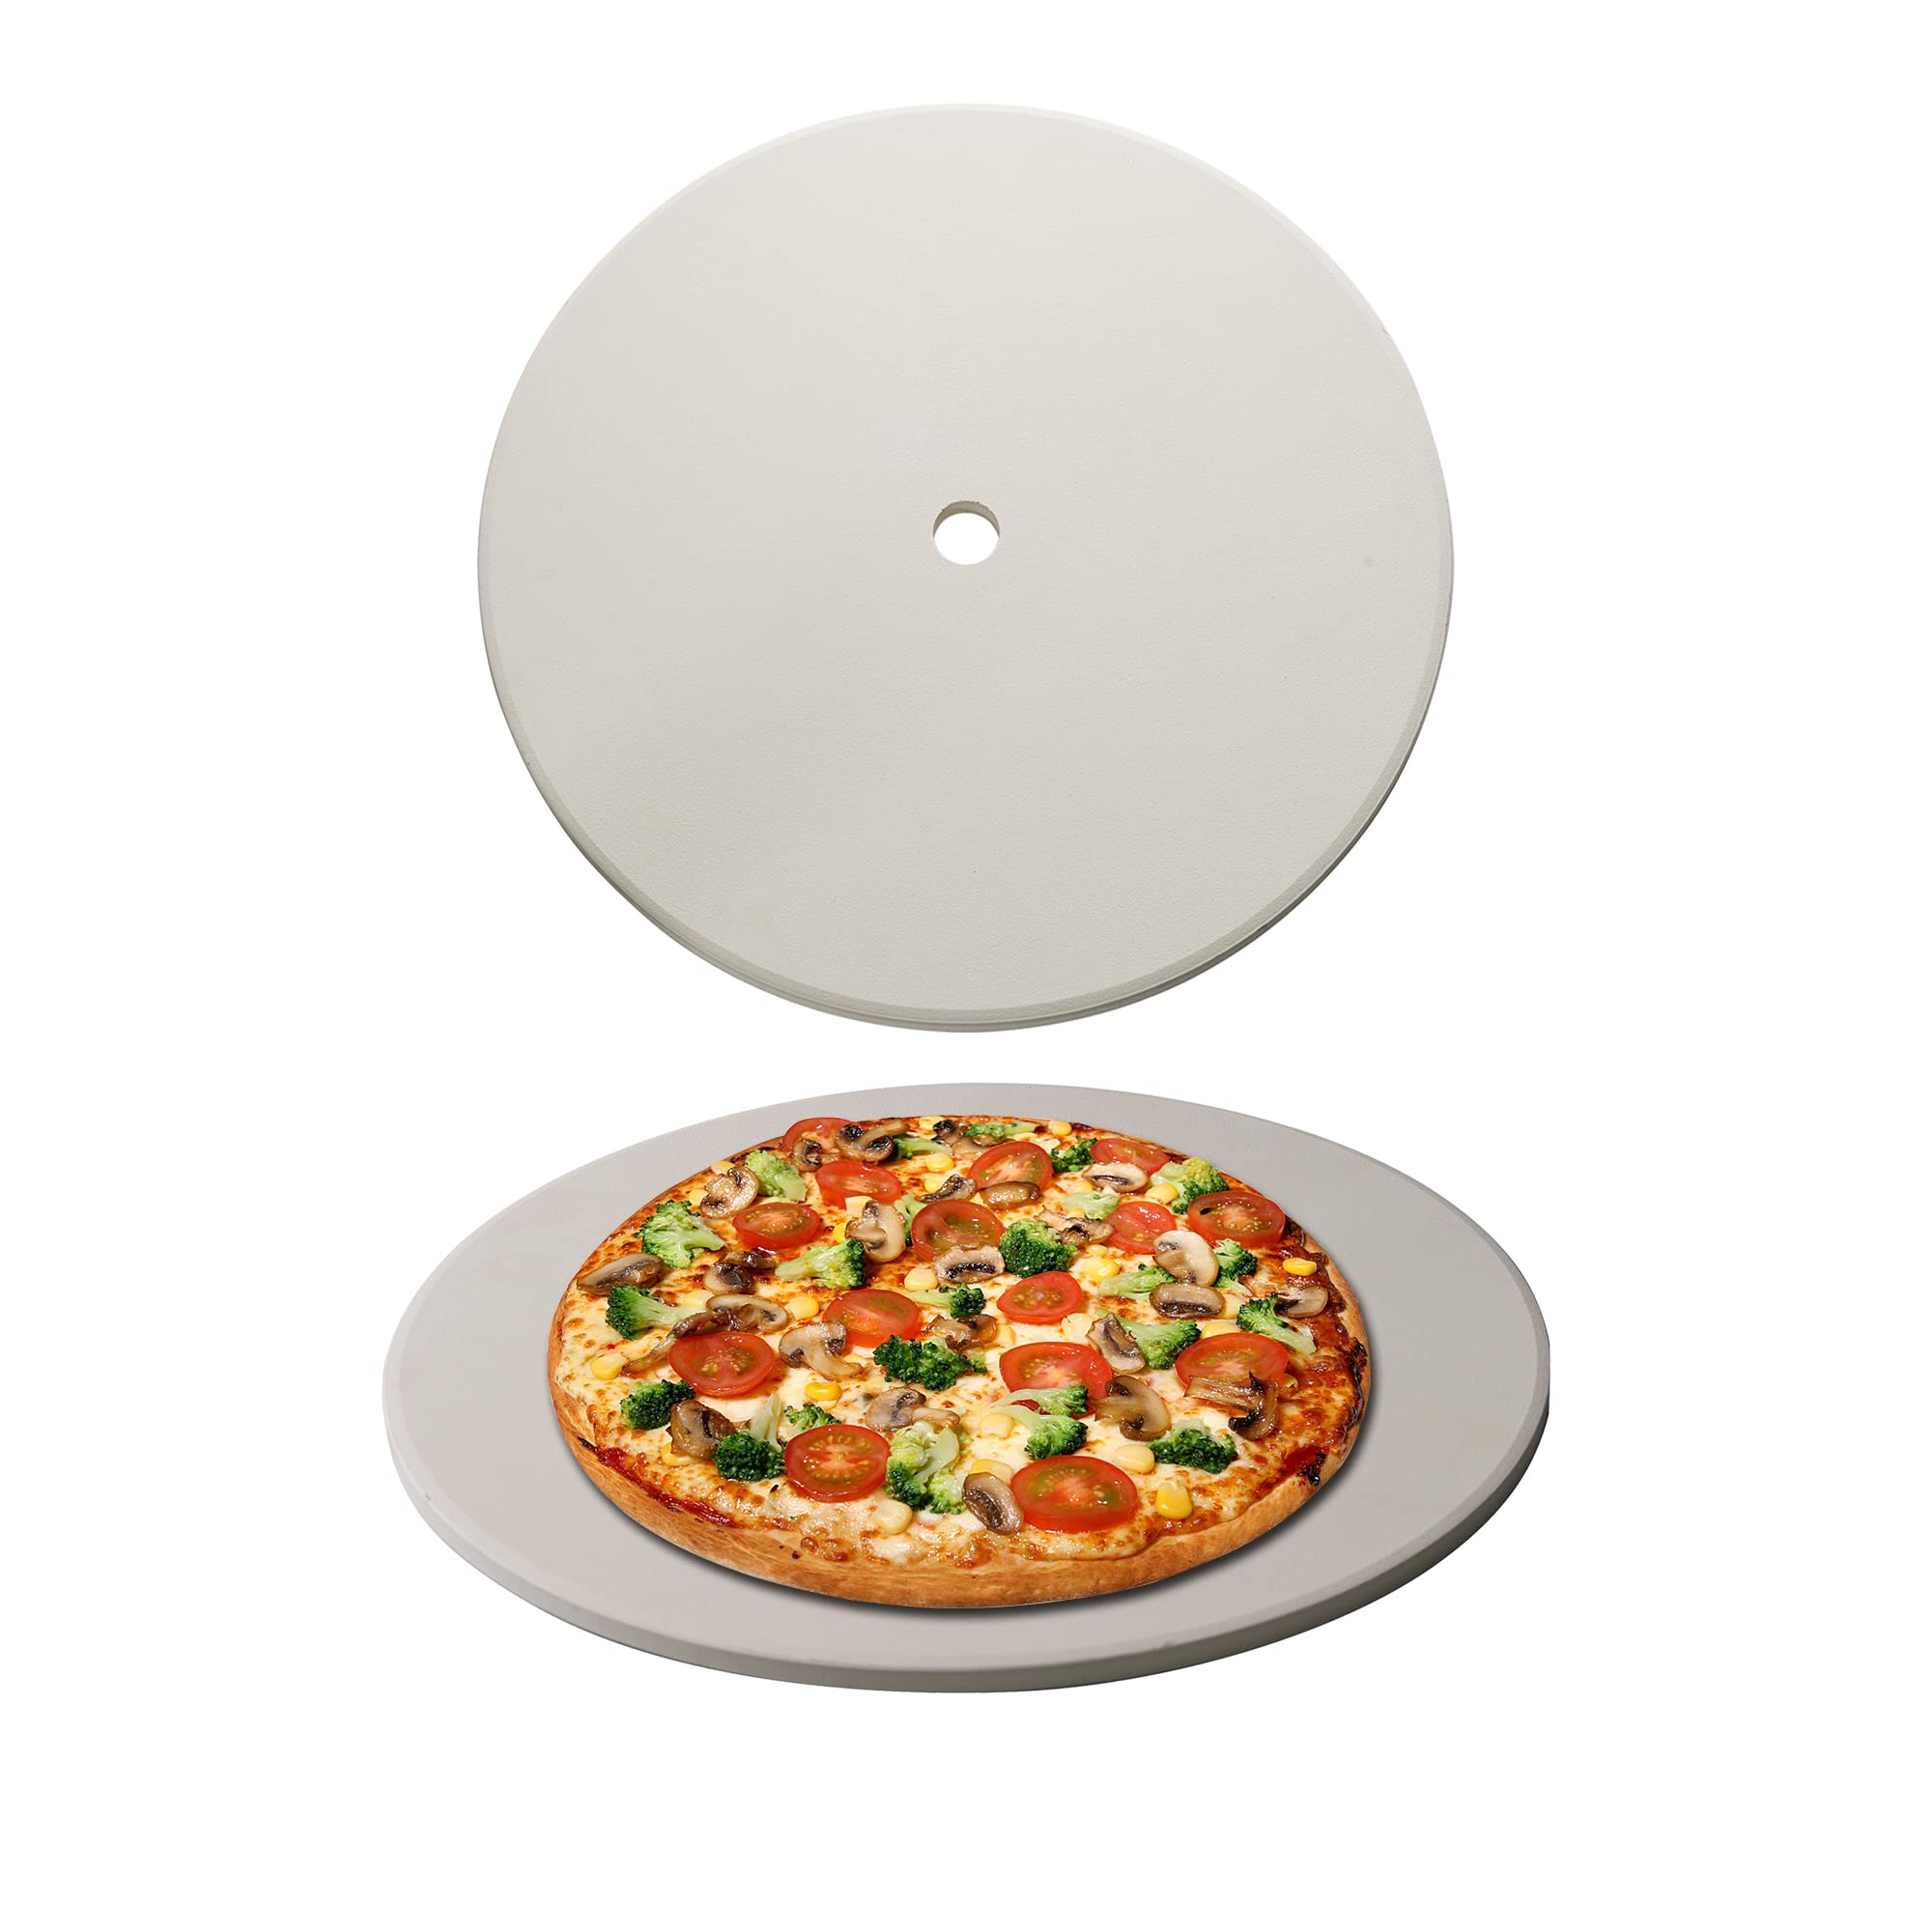 13" Round Pizza Stone for Oven and Grill